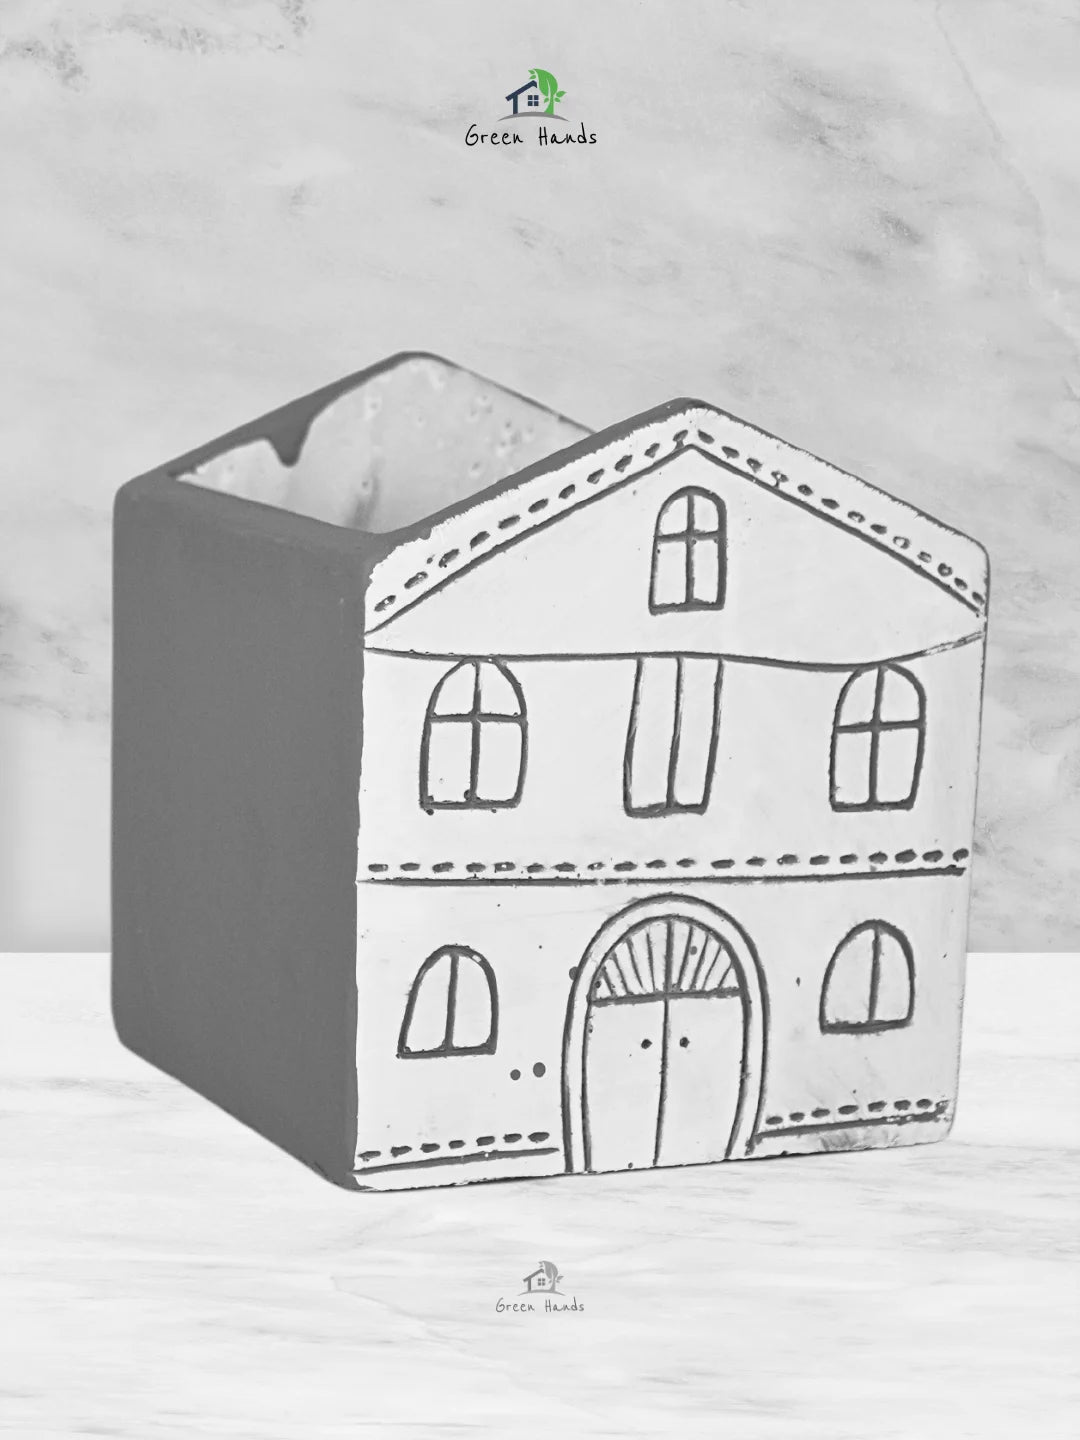 White Cement House Shaped Planter: A Whimsical Touch to Your Indoor Garden